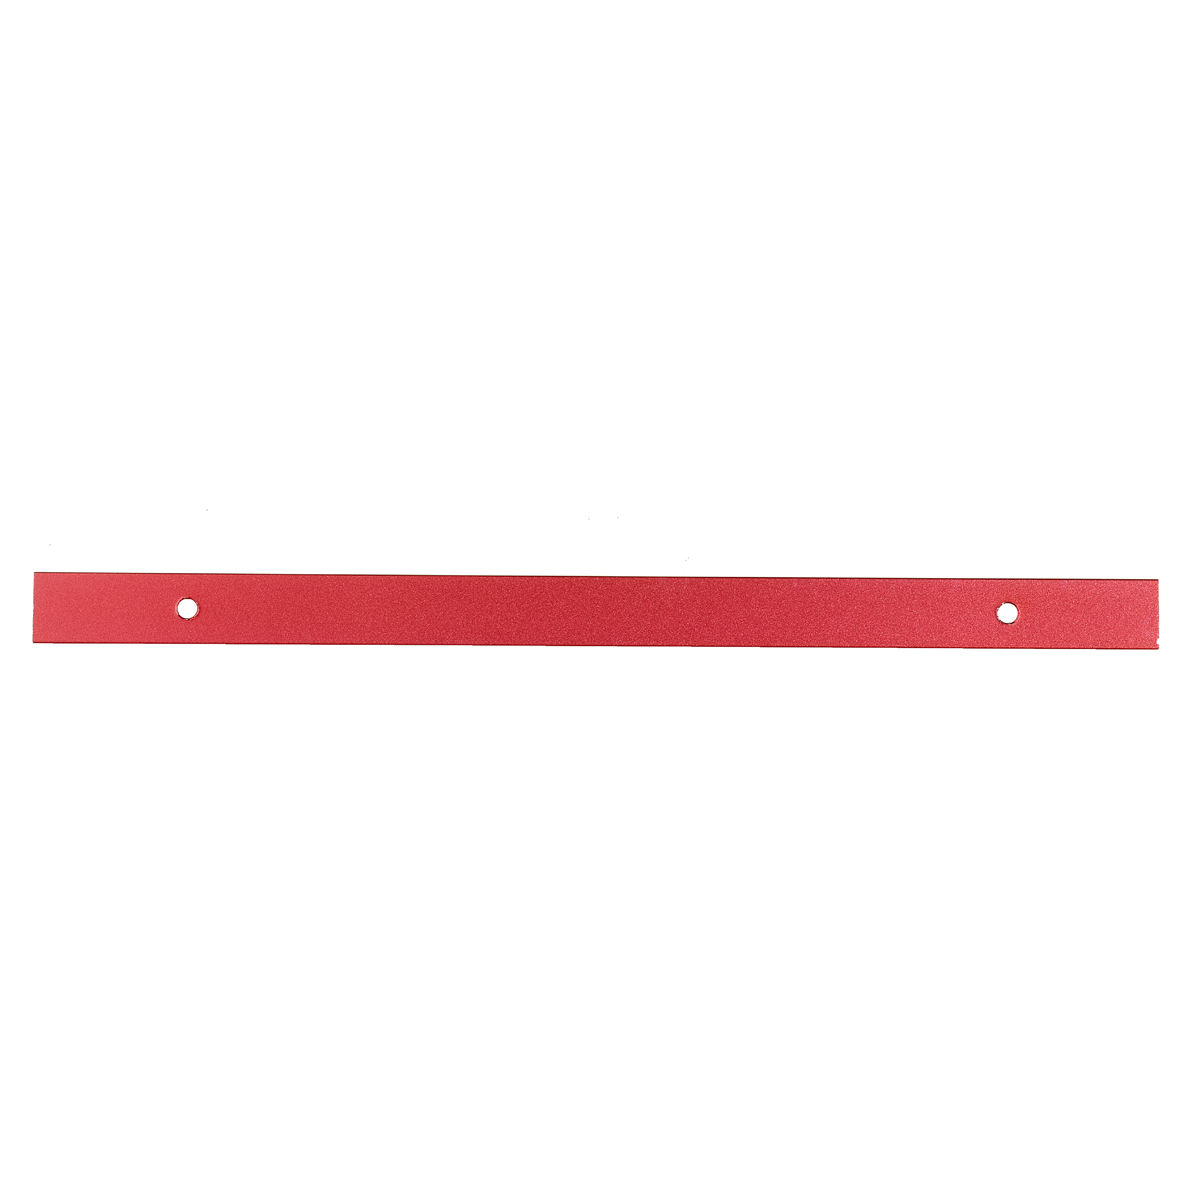 Red-Aluminum-Alloy-300-1220mm-T-track-T-slot-Miter-Track-Jig-T-Screw-Fixture-Slot-19x95mm-For-Table--1682608-5